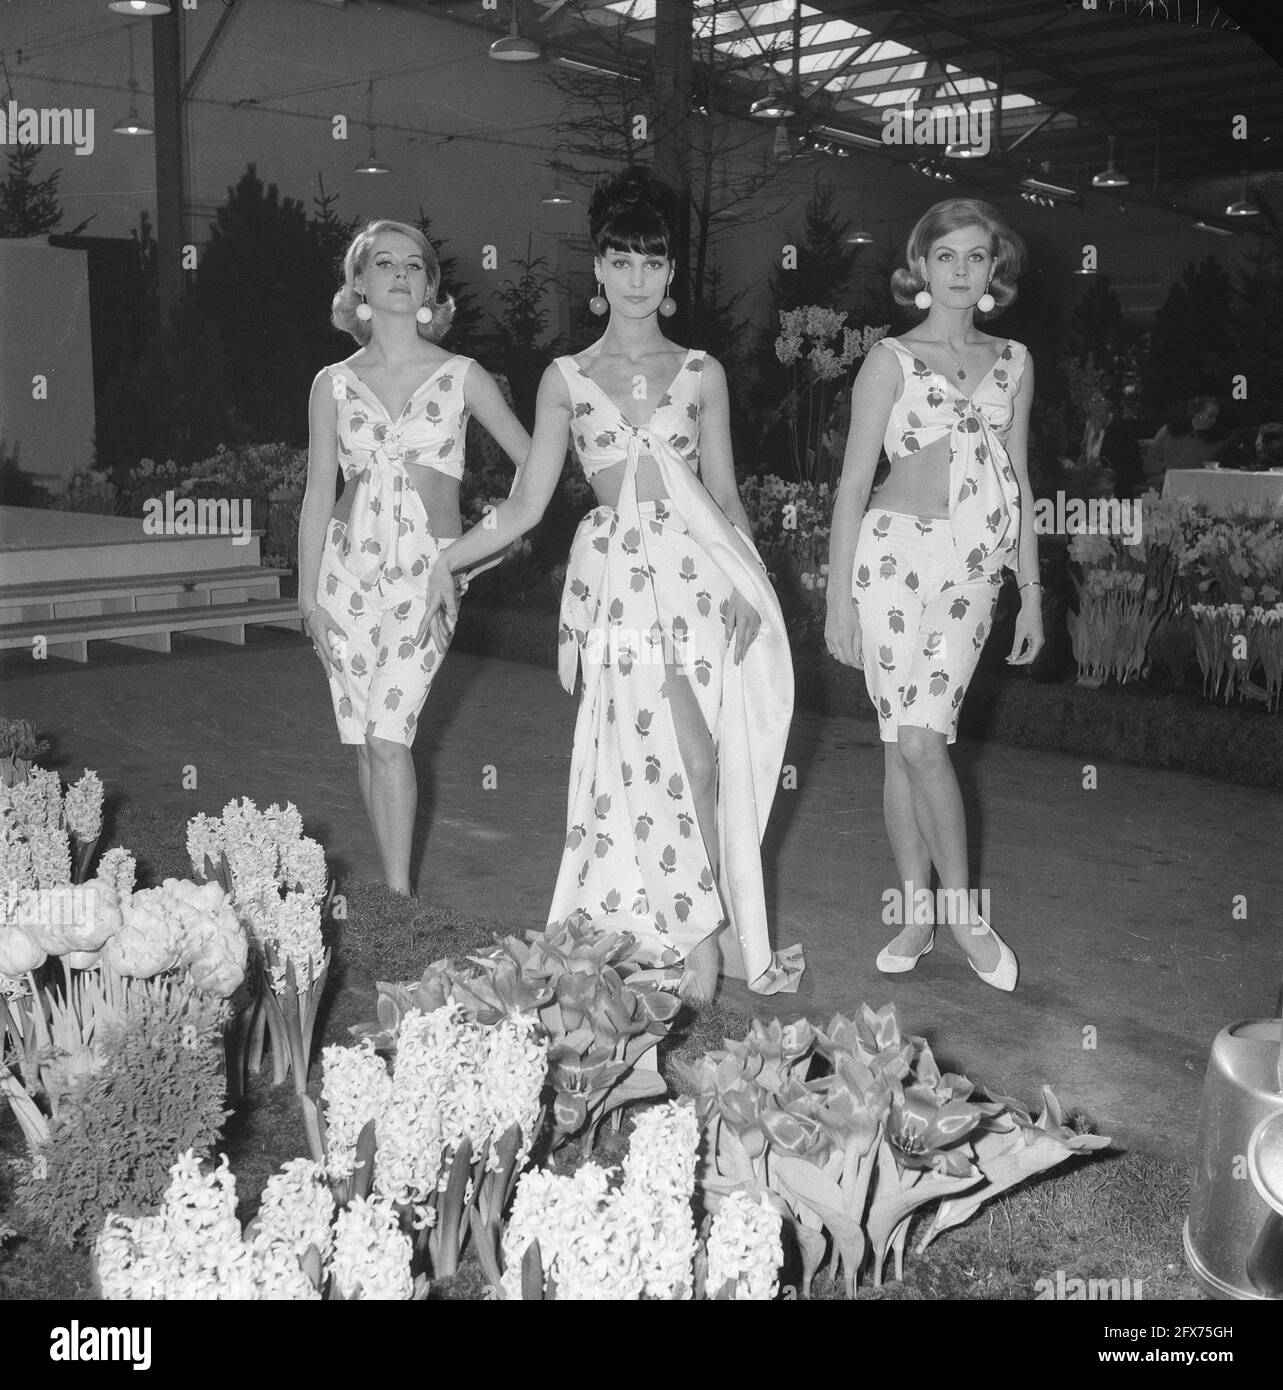 Illusion des Fleurs fashion show Bovenkarspel, February 20, 1962, fashion shows, The Netherlands, 20th century press agency photo, news to remember, documentary, historic photography 1945-1990, visual stories, human history of the Twentieth Century, capturing moments in time Stock Photo